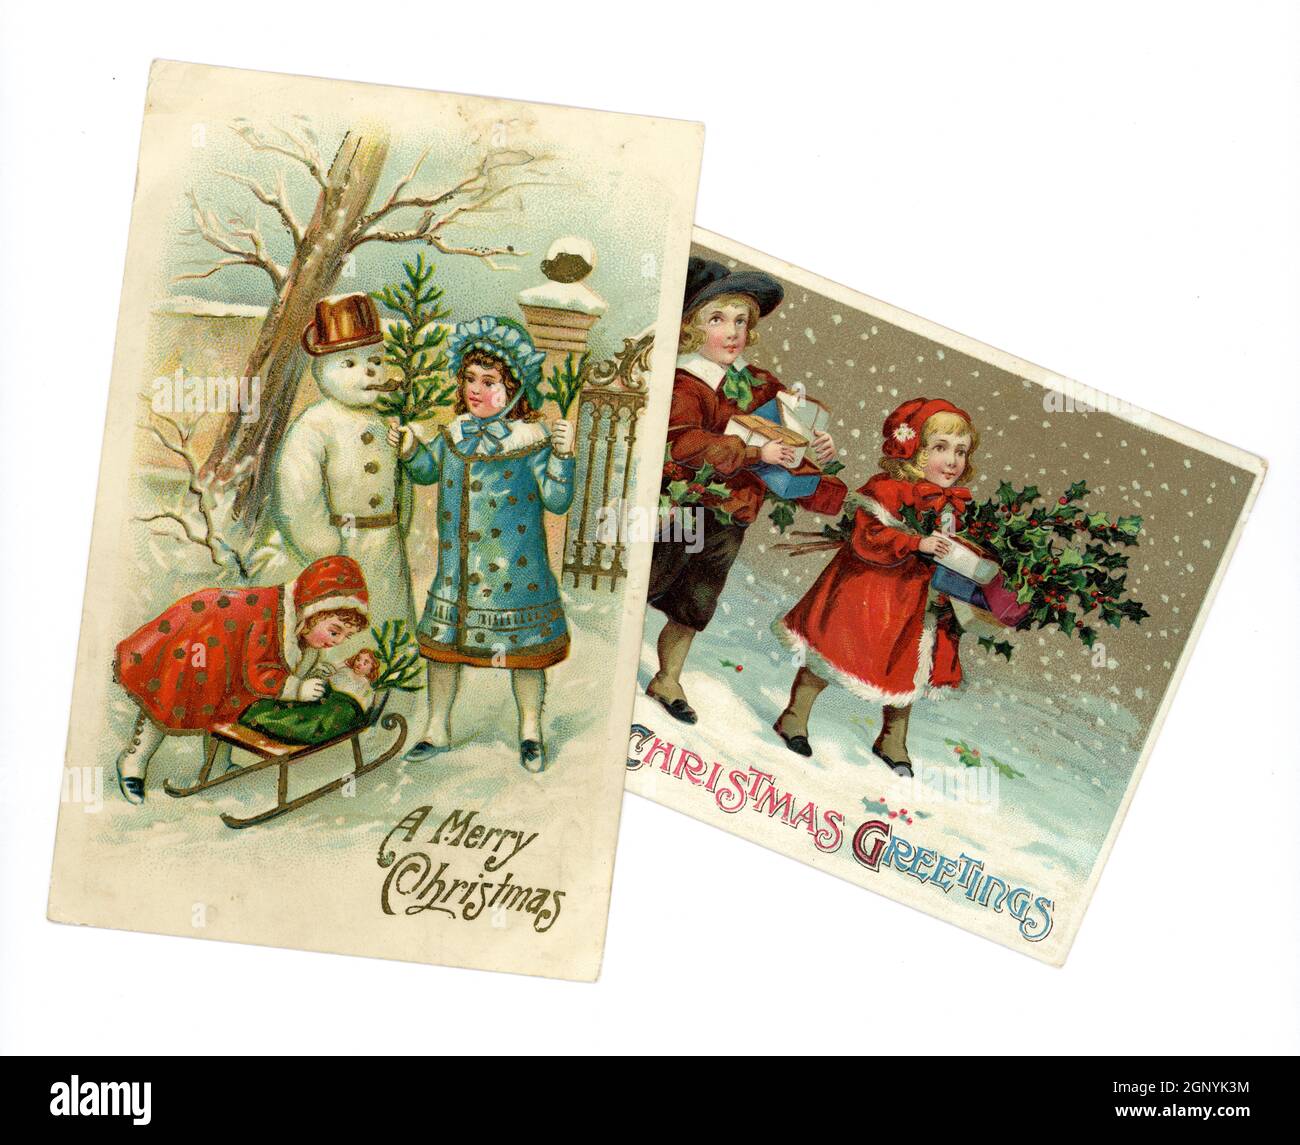 Original embossed Edwardian era Christmas greetings postcards printed in Germany, of cute young children wearing winter clothes fashionable at this time, building a snowman and bearing gifts, circa 1910, U.K. Stock Photo